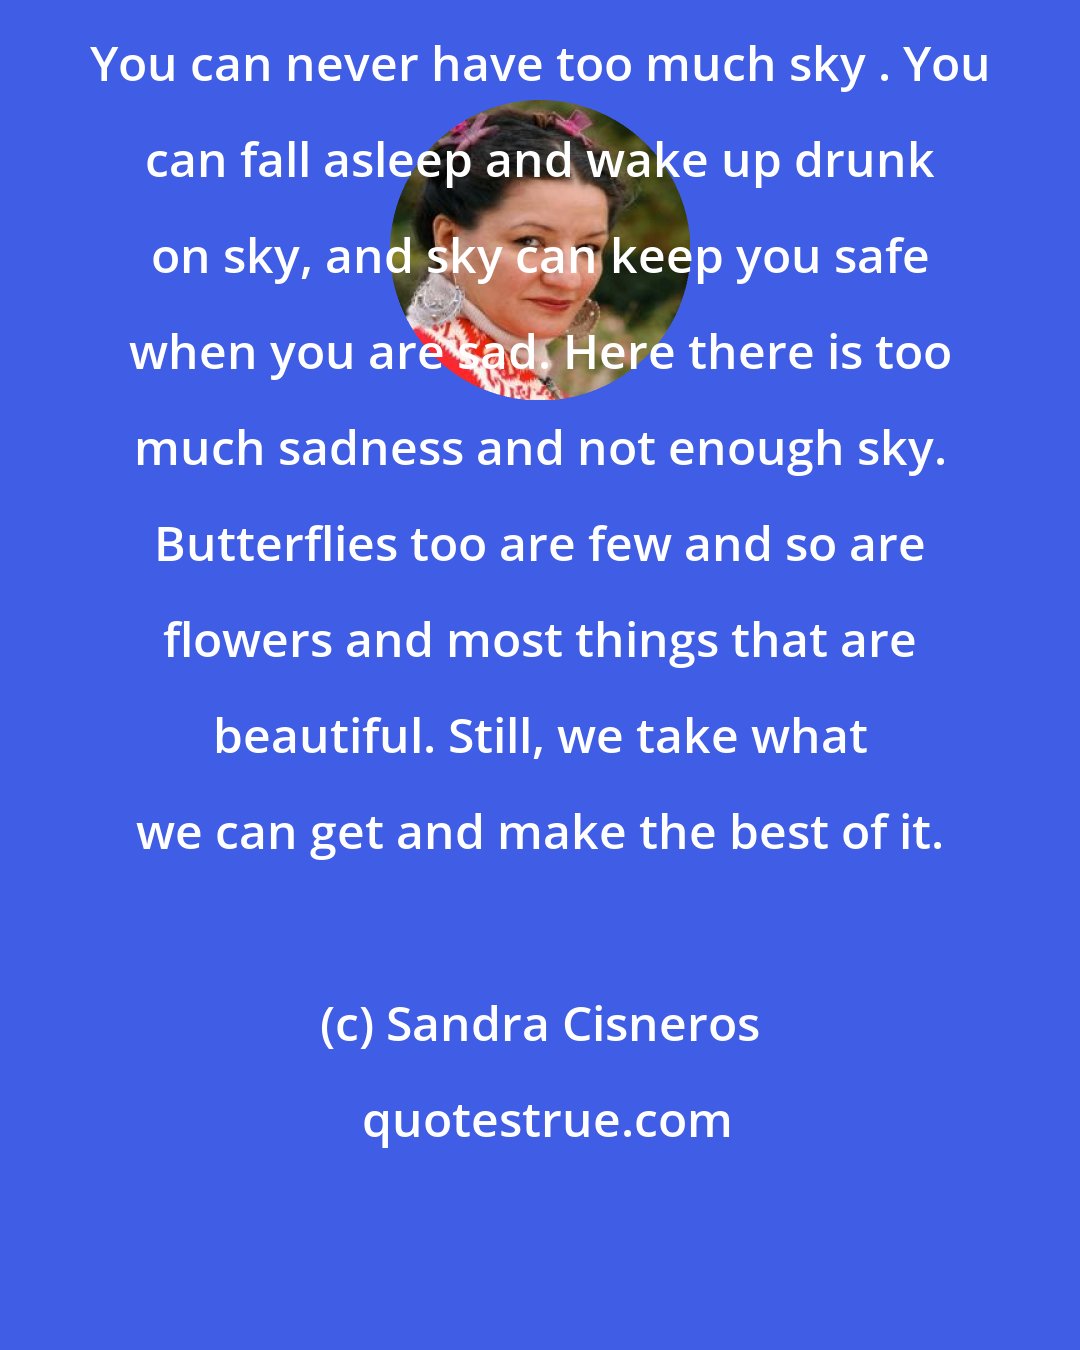 Sandra Cisneros: You can never have too much sky . You can fall asleep and wake up drunk on sky, and sky can keep you safe when you are sad. Here there is too much sadness and not enough sky. Butterflies too are few and so are flowers and most things that are beautiful. Still, we take what we can get and make the best of it.